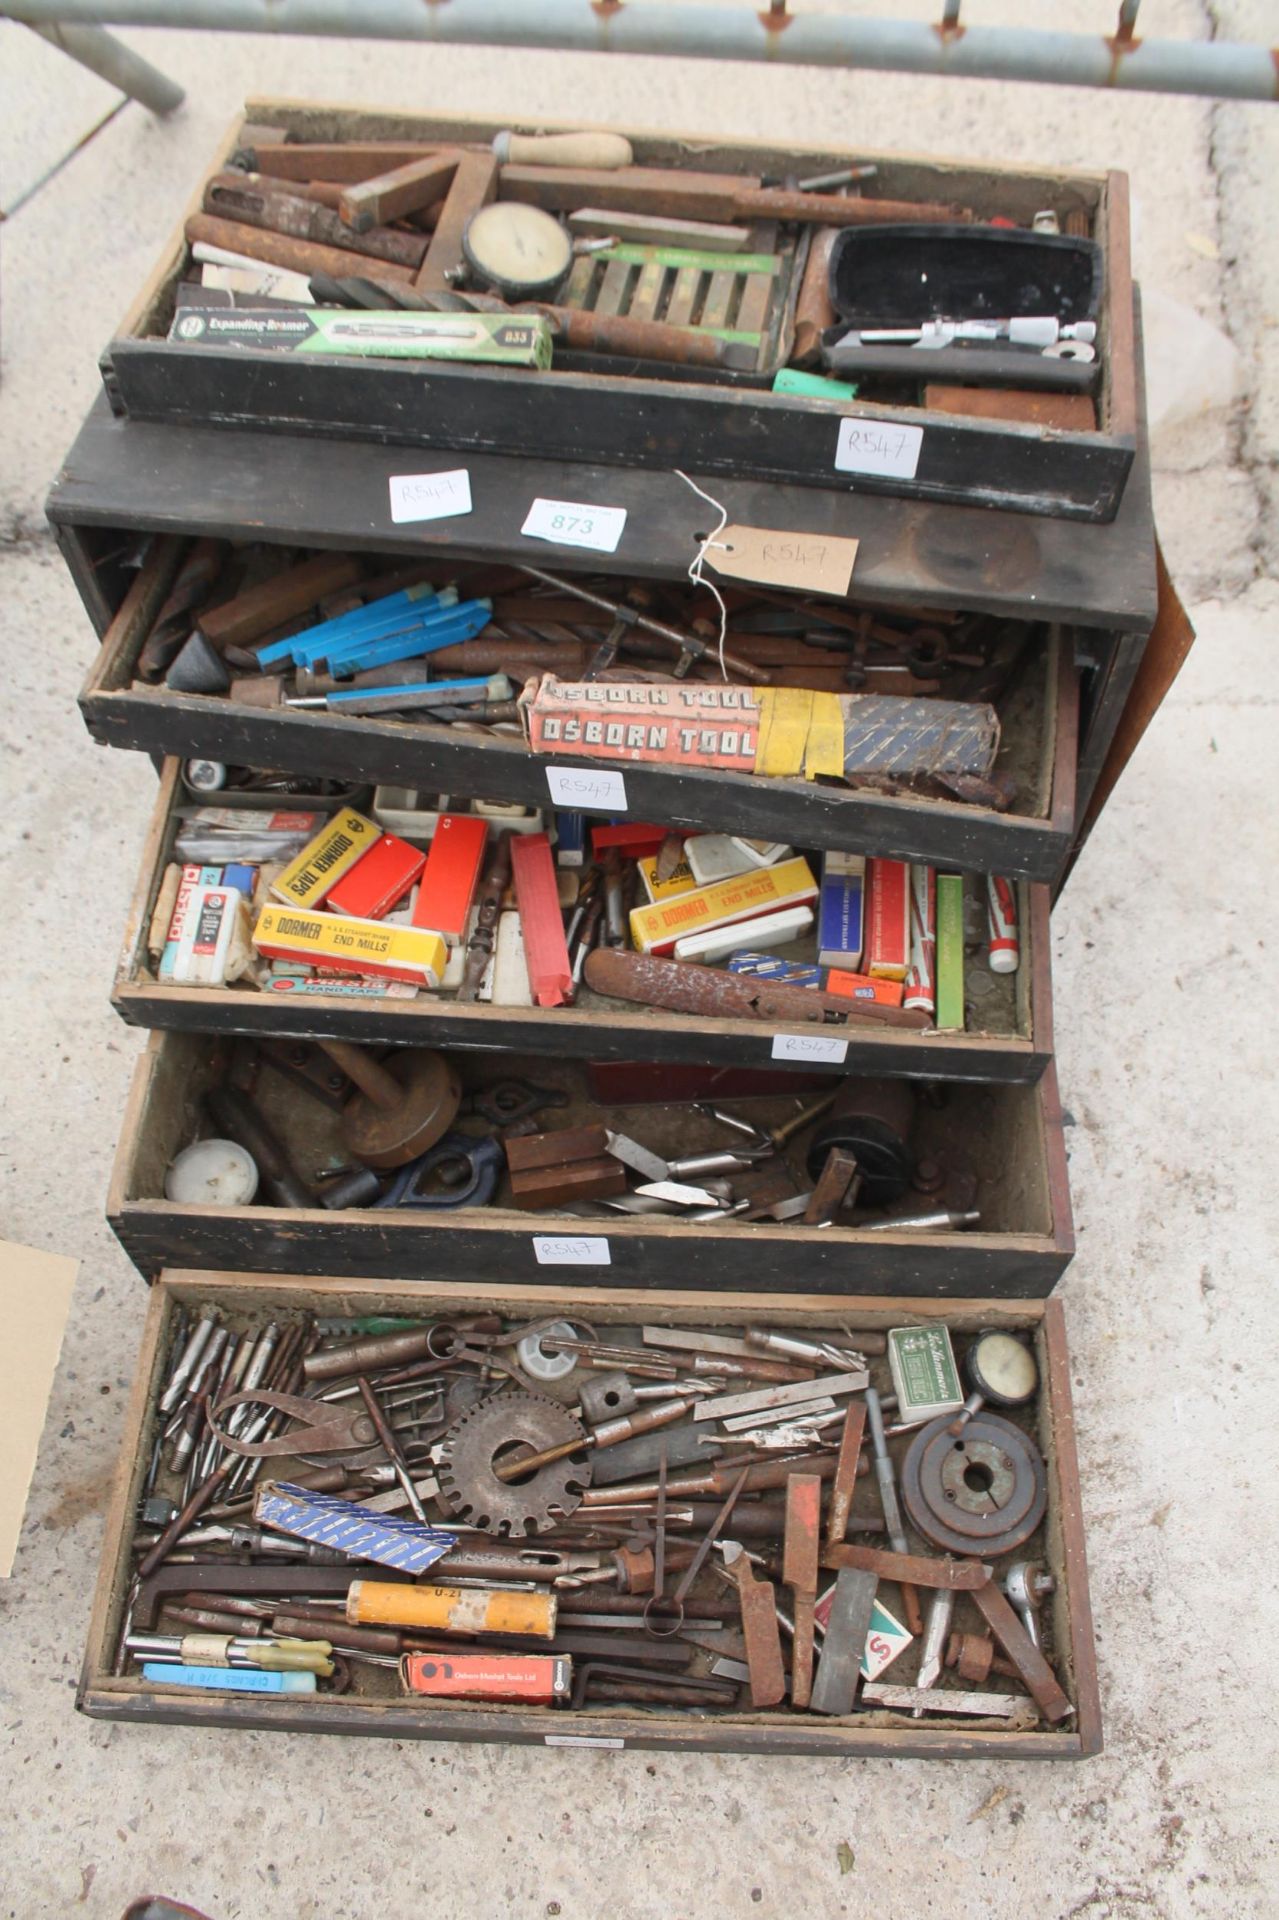 TOOL CHEST, DYES, LATHE, CUTTERS, MICROMETER NO VAT